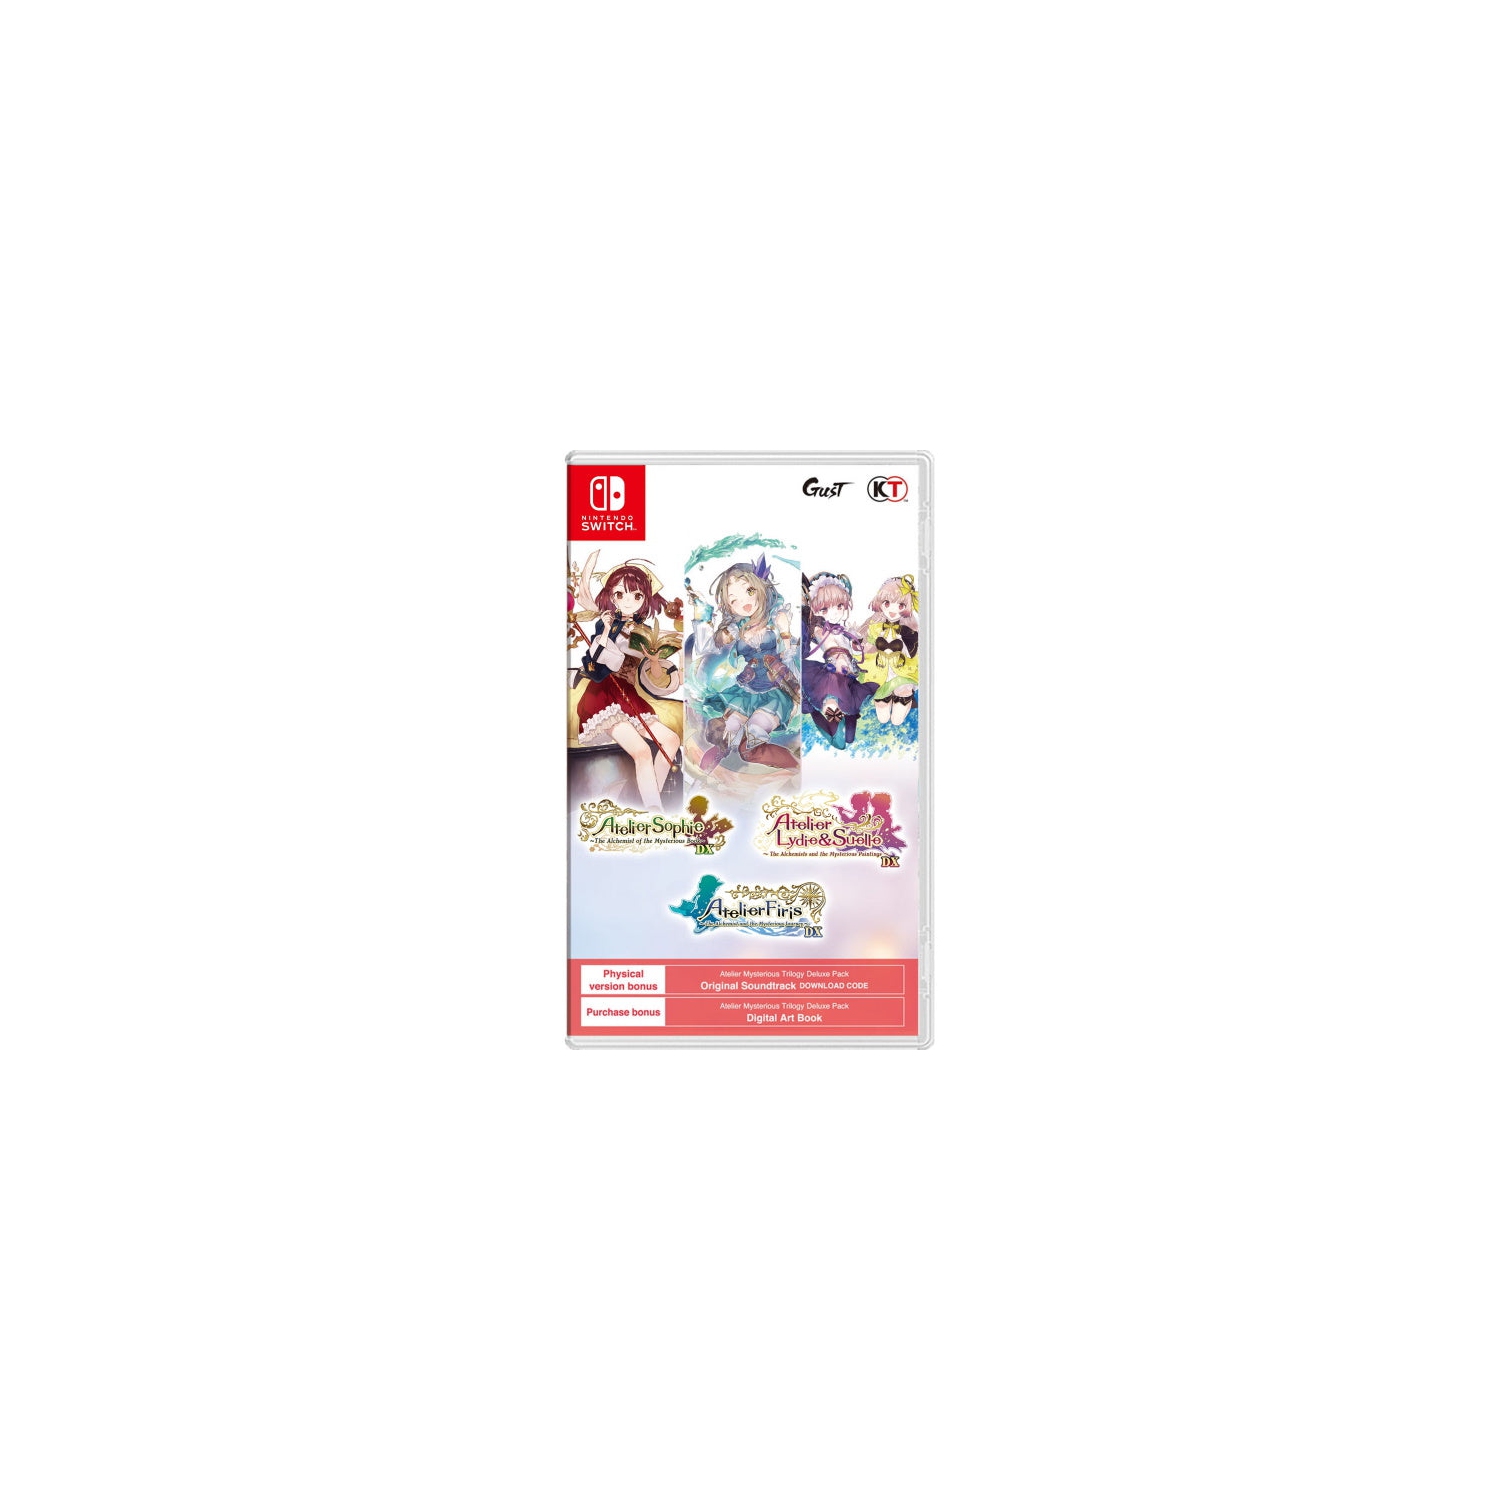 Atelier Mysterious Trilogy Deluxe Pack [Nintendo Switch]